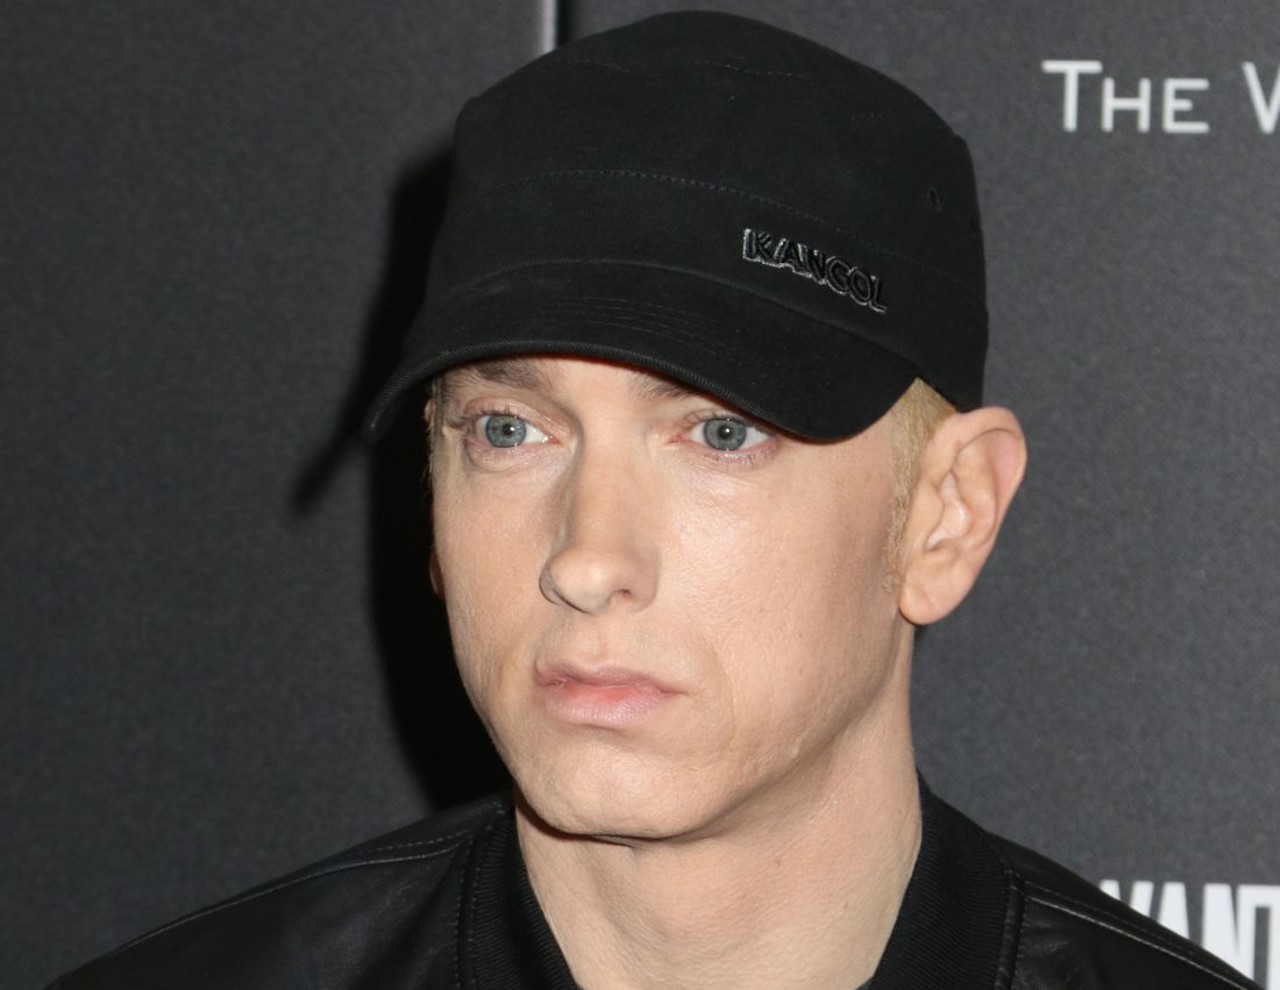 Eminem
In 2020, I resolve to...
drop all the beefs and focus on making a good record again.
(And how about a Detroit tour date? We haven't seen him since the Home & Home Tour in September 2010.)&nbsp;
Photo via Shutterstock